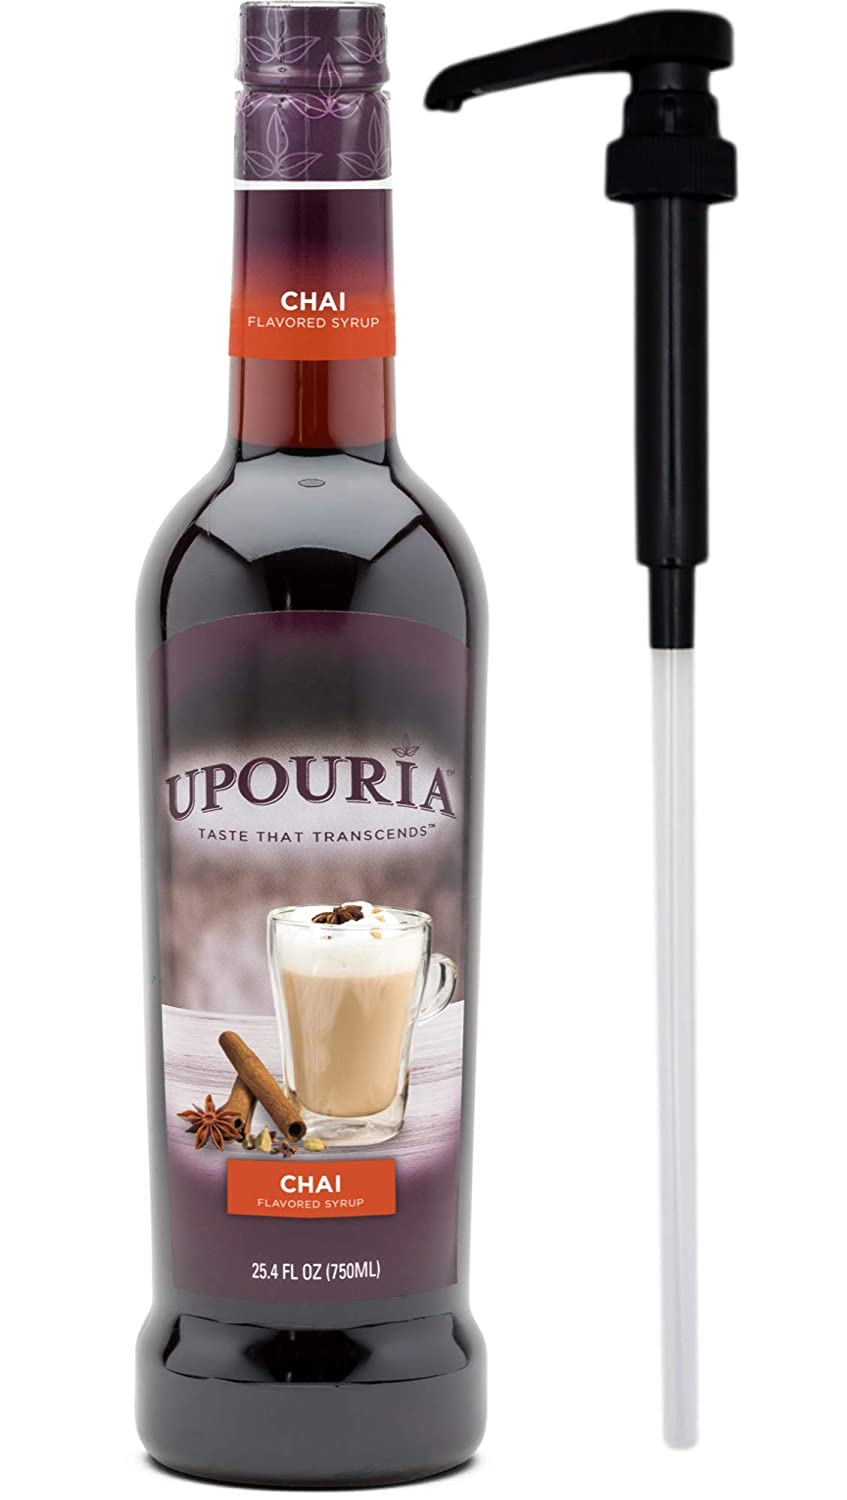 Upouria Chai Flavored Syrup, 100% Vegan and Gluten-Free, 750ml bottle - Pump included